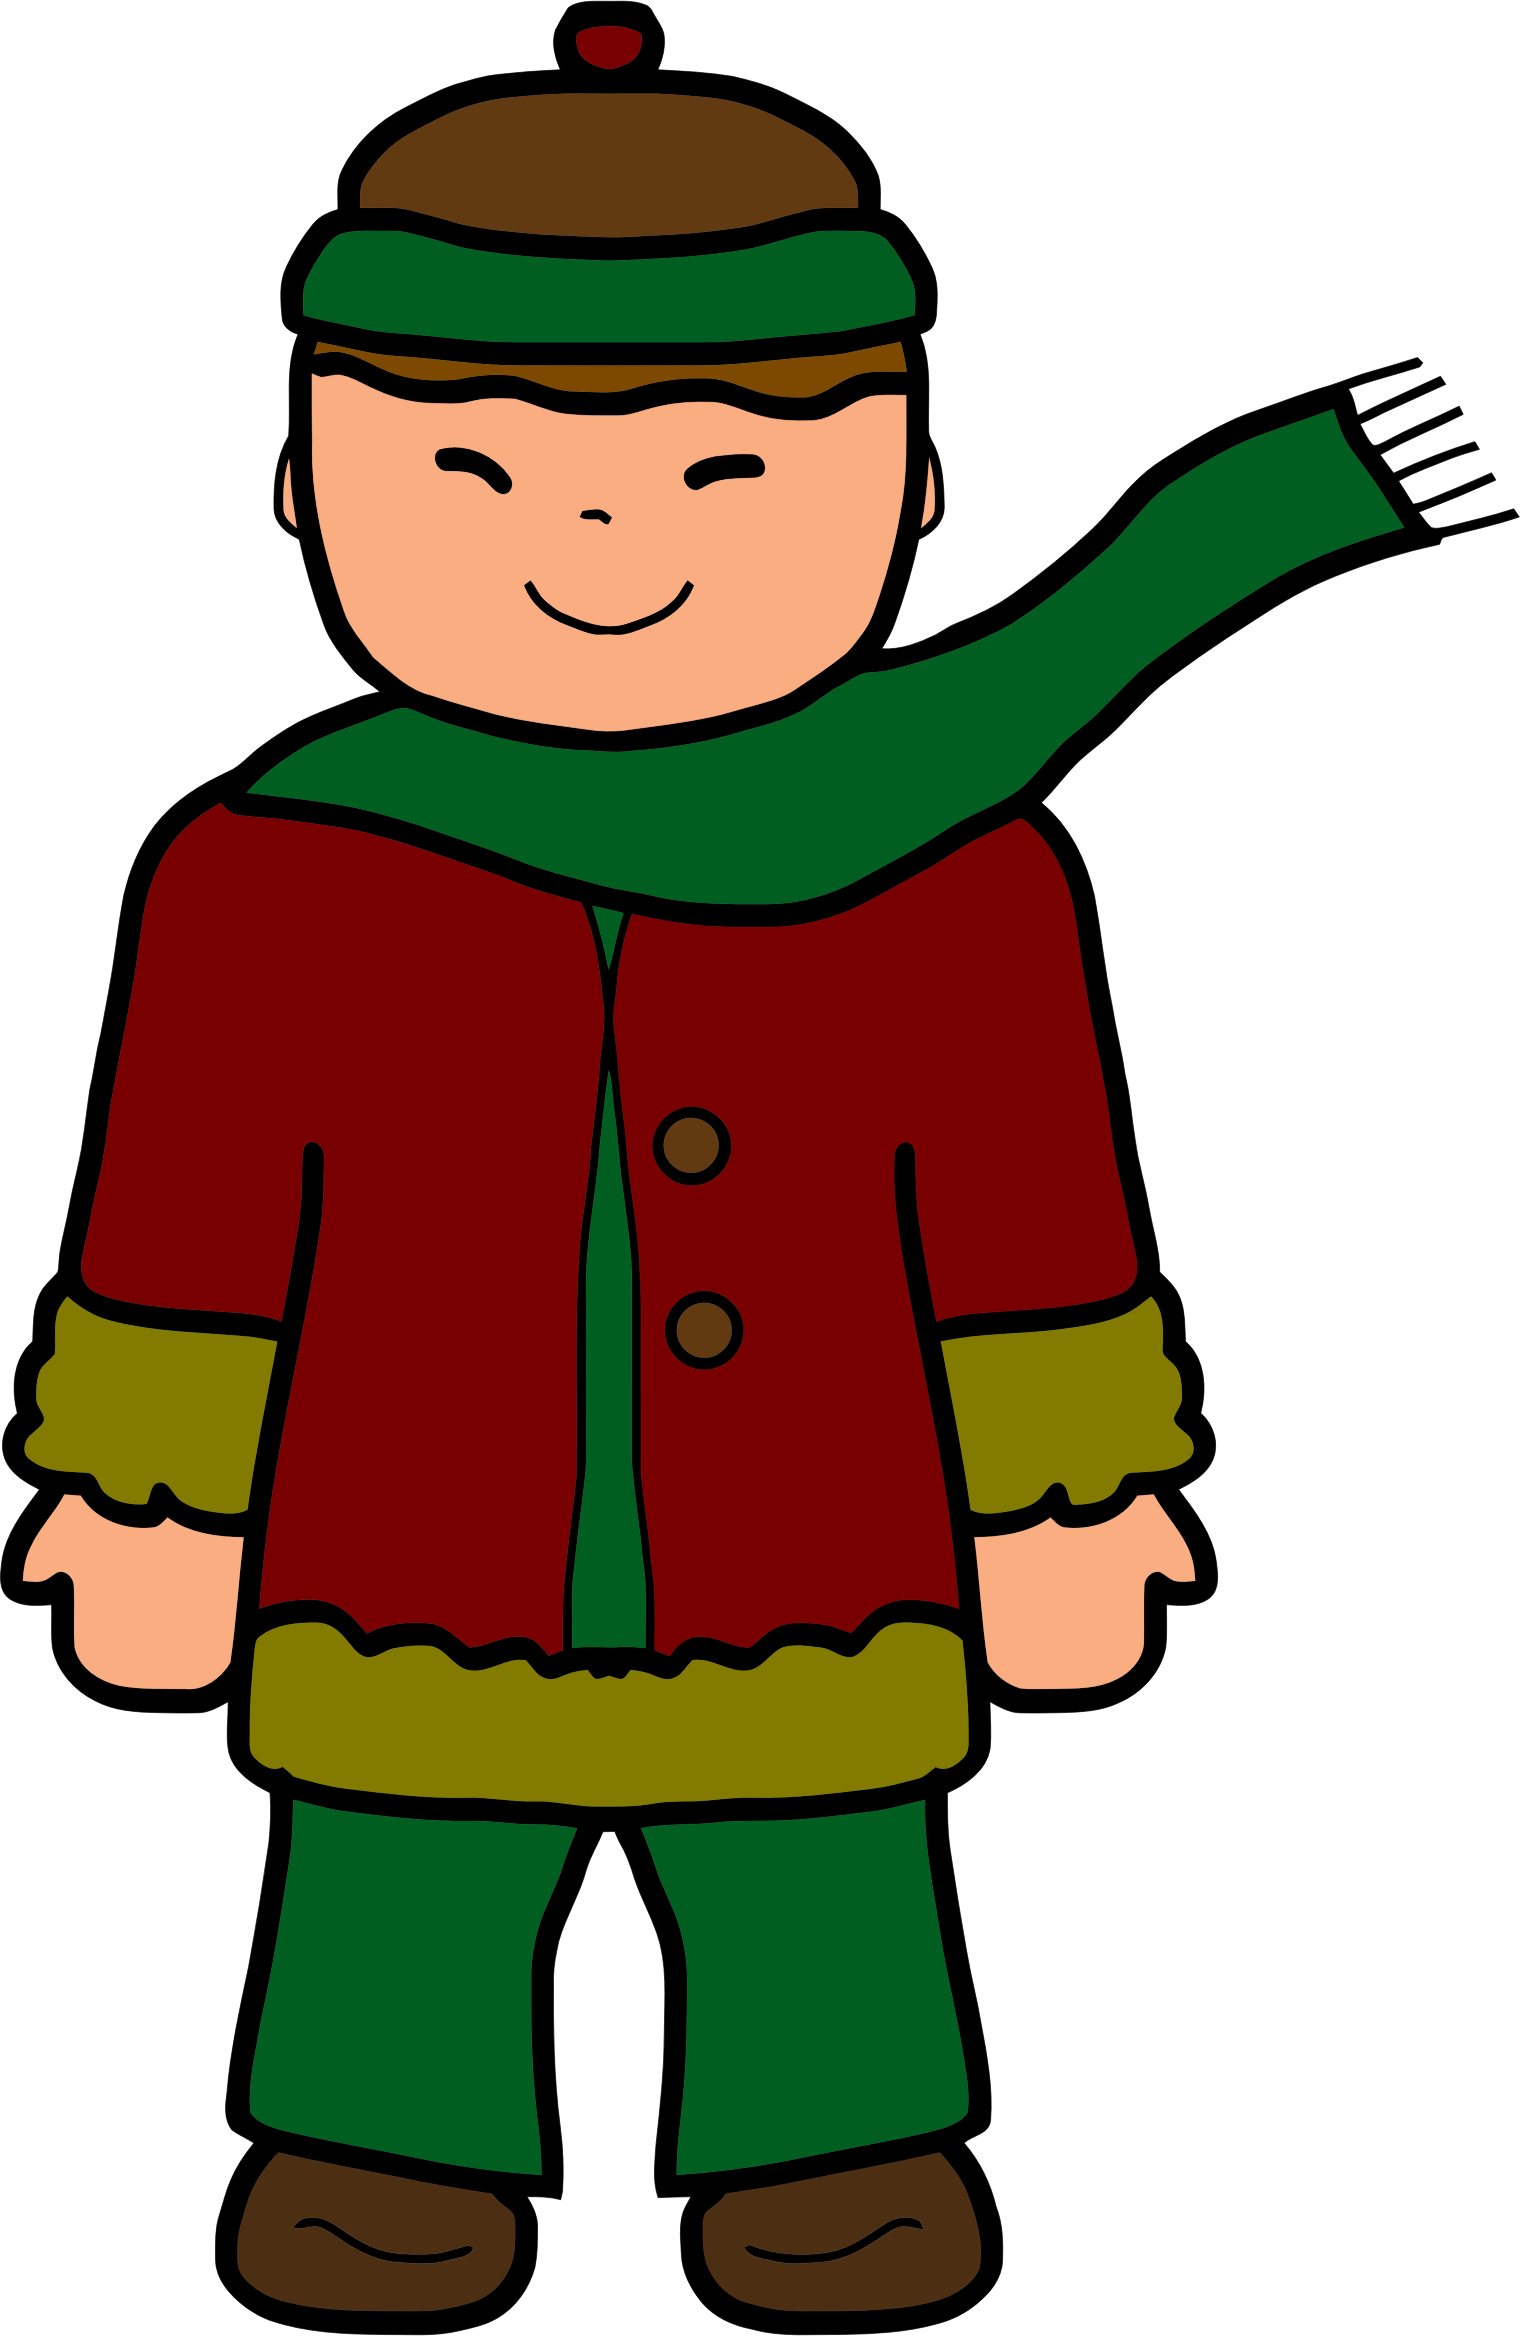 Download Clipart - Boy In Winter Clothing